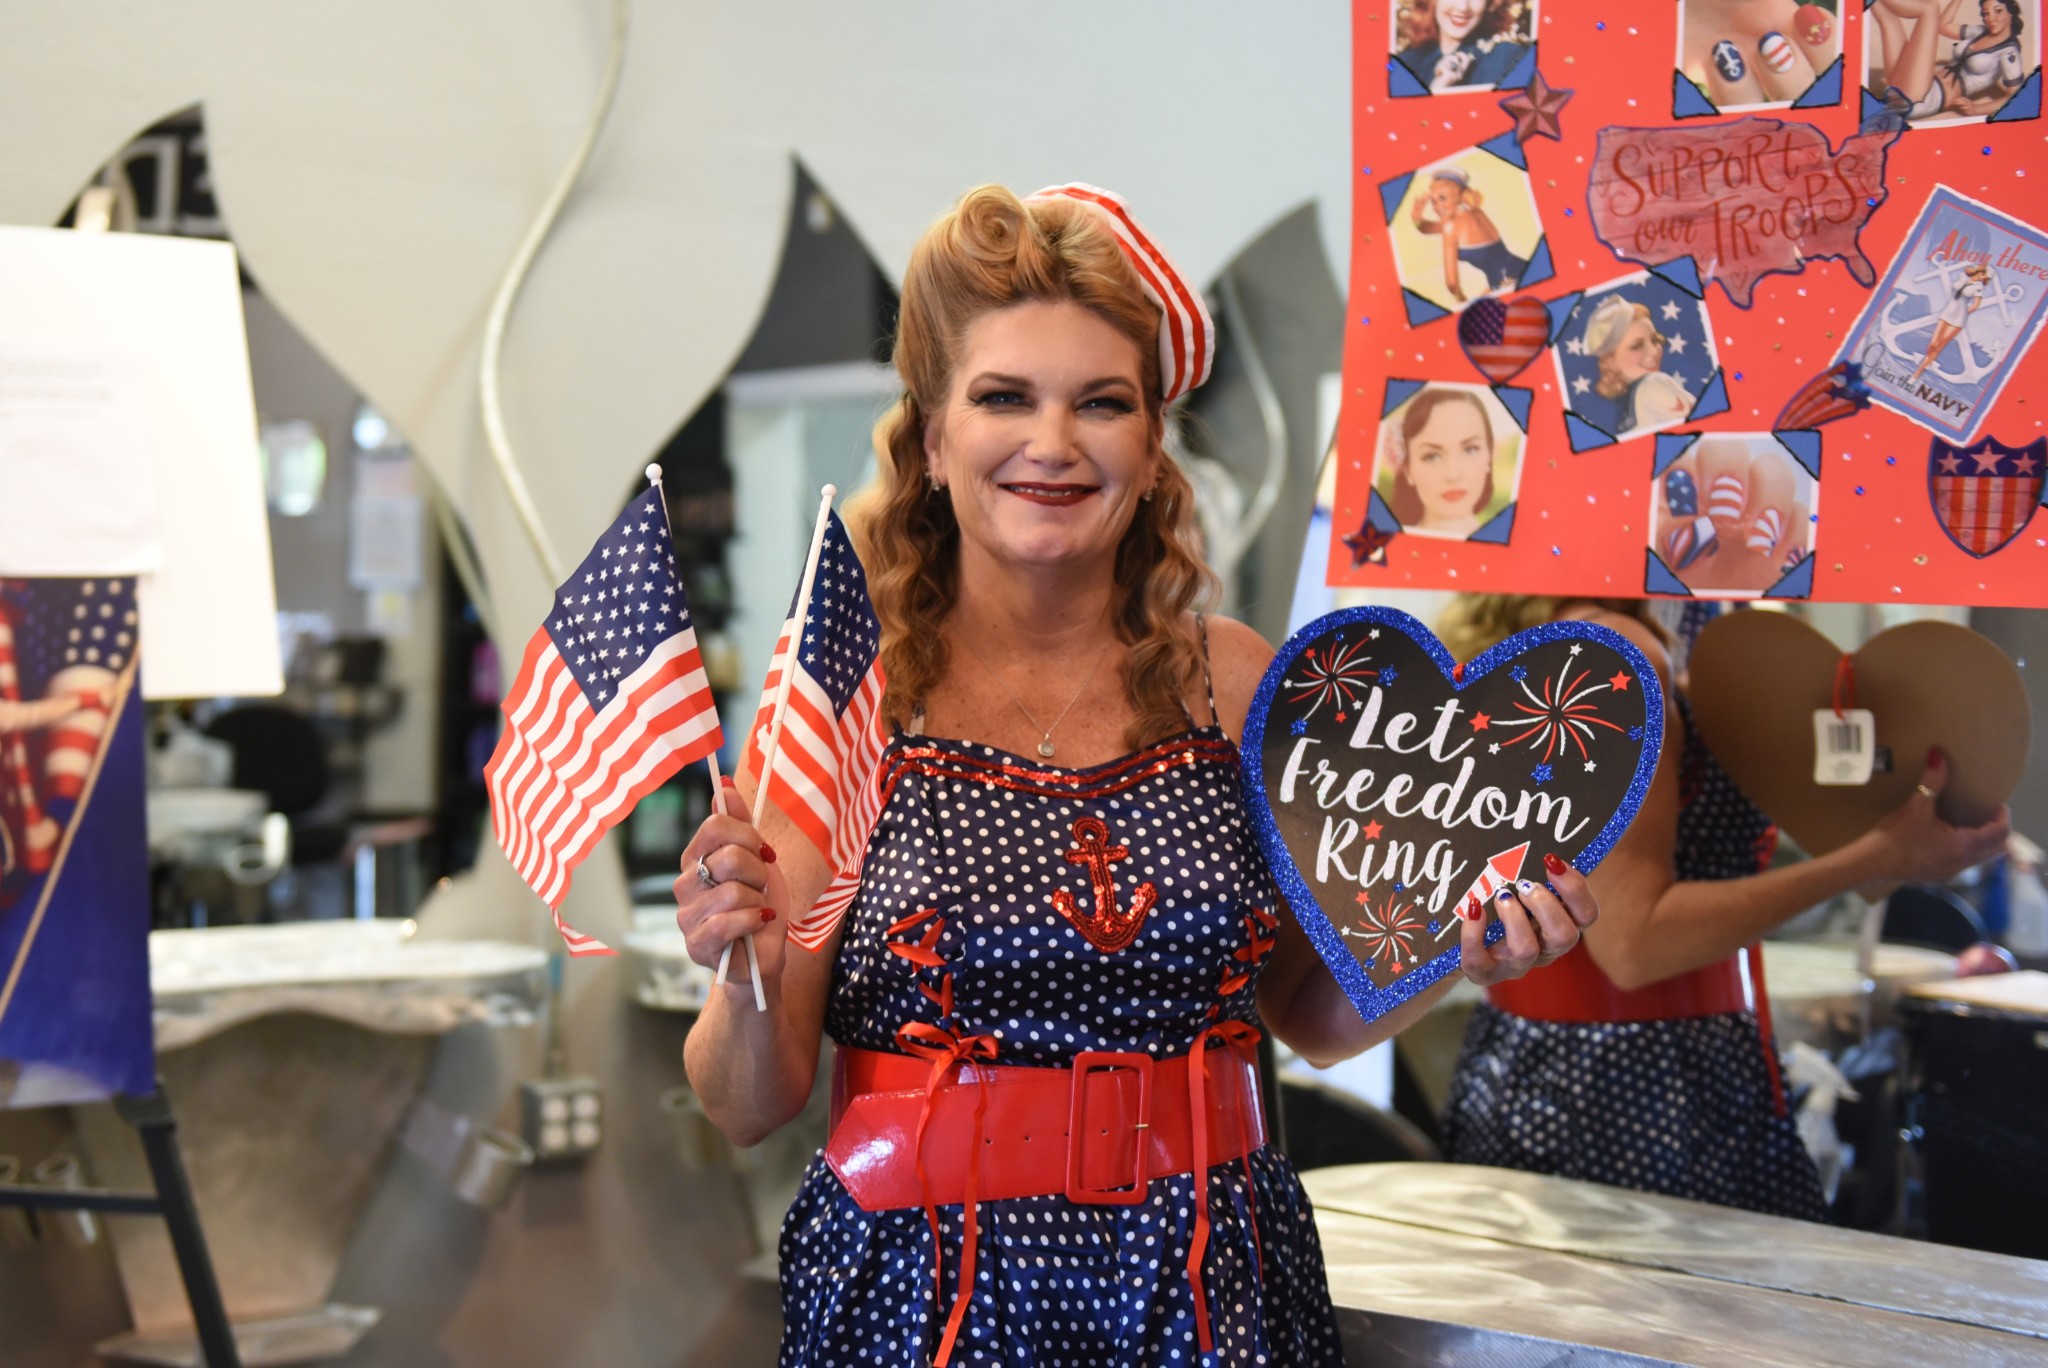 Woman dressed in red white and blue dress with a red and white striped hat celebrating freedom